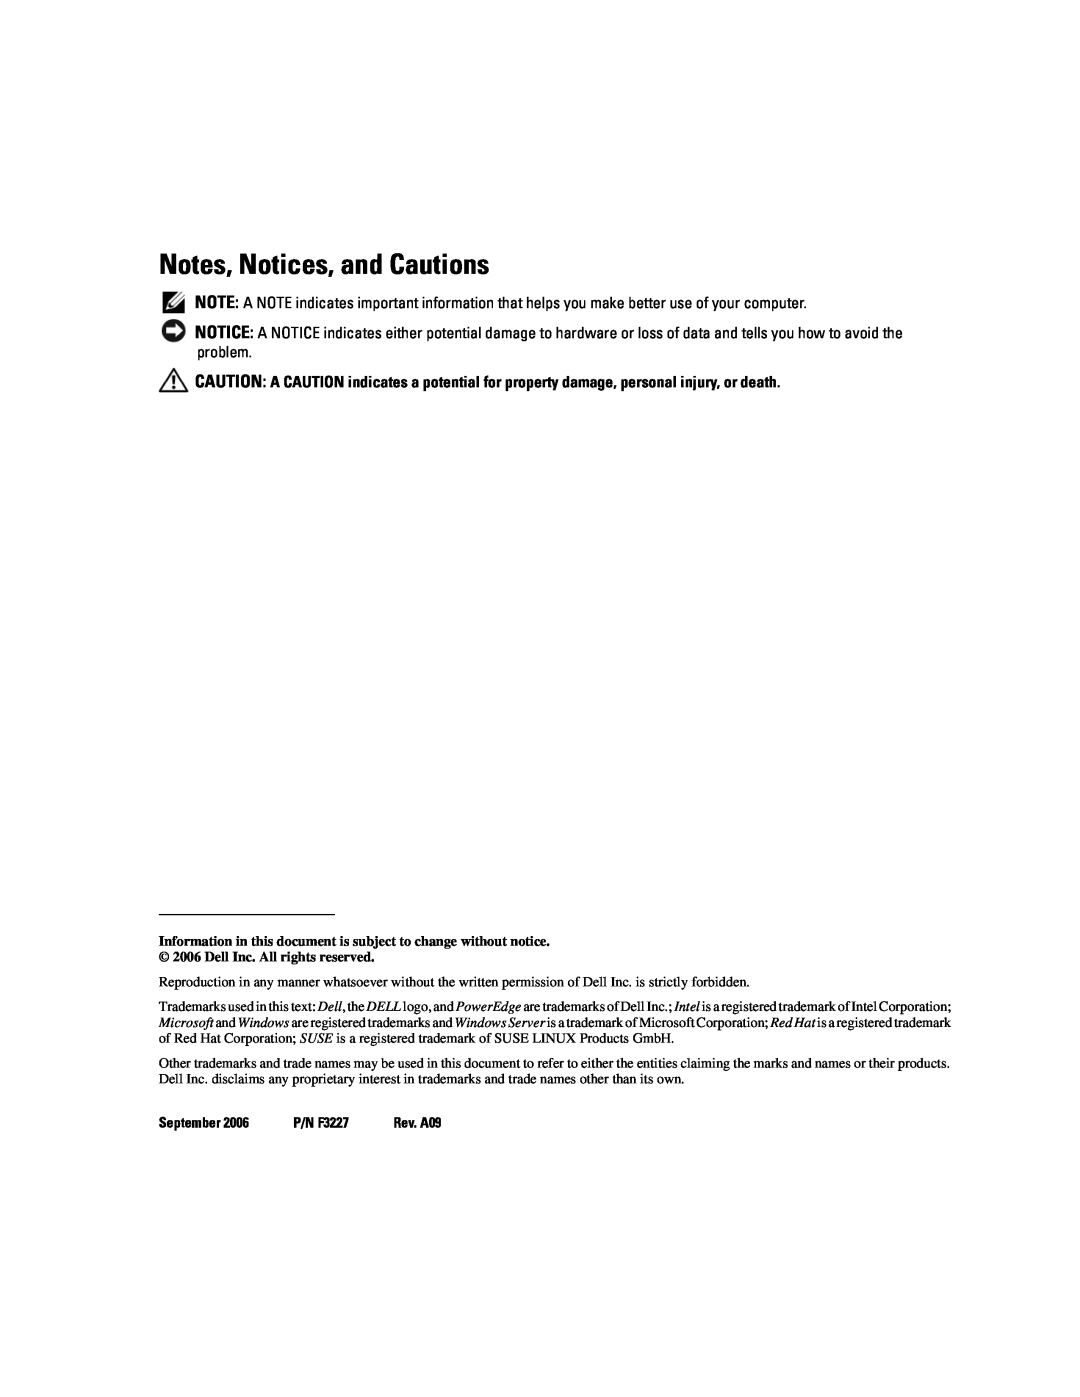 Dell 6800 manual Notes, Notices, and Cautions, September, P/N F3227 